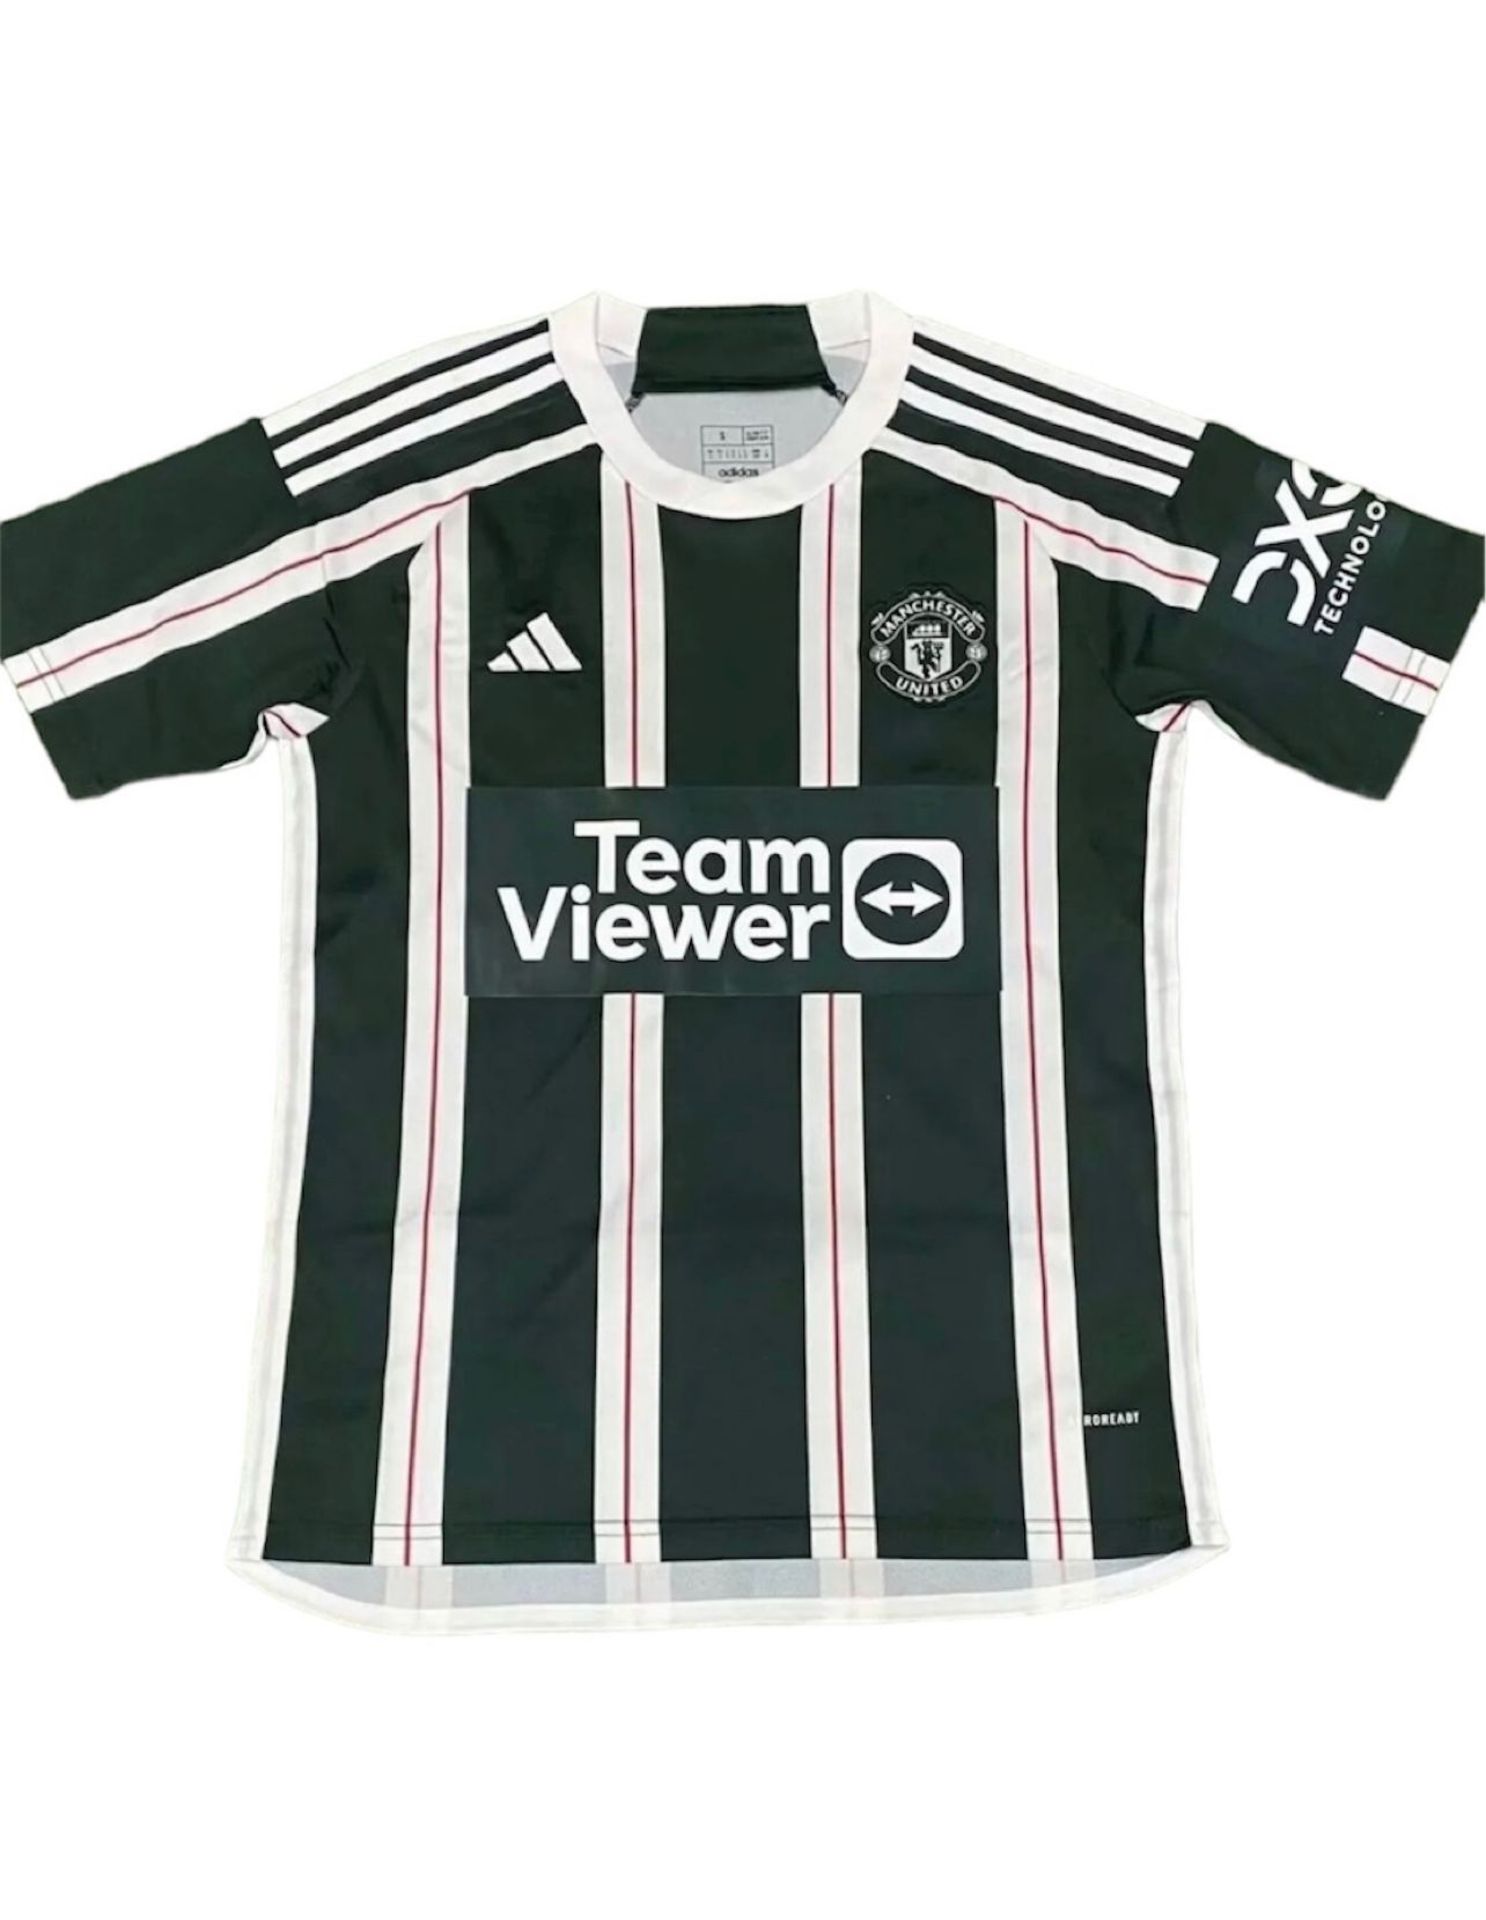 Mix man United Style 23/24 home, away, and third shirts - Image 4 of 6